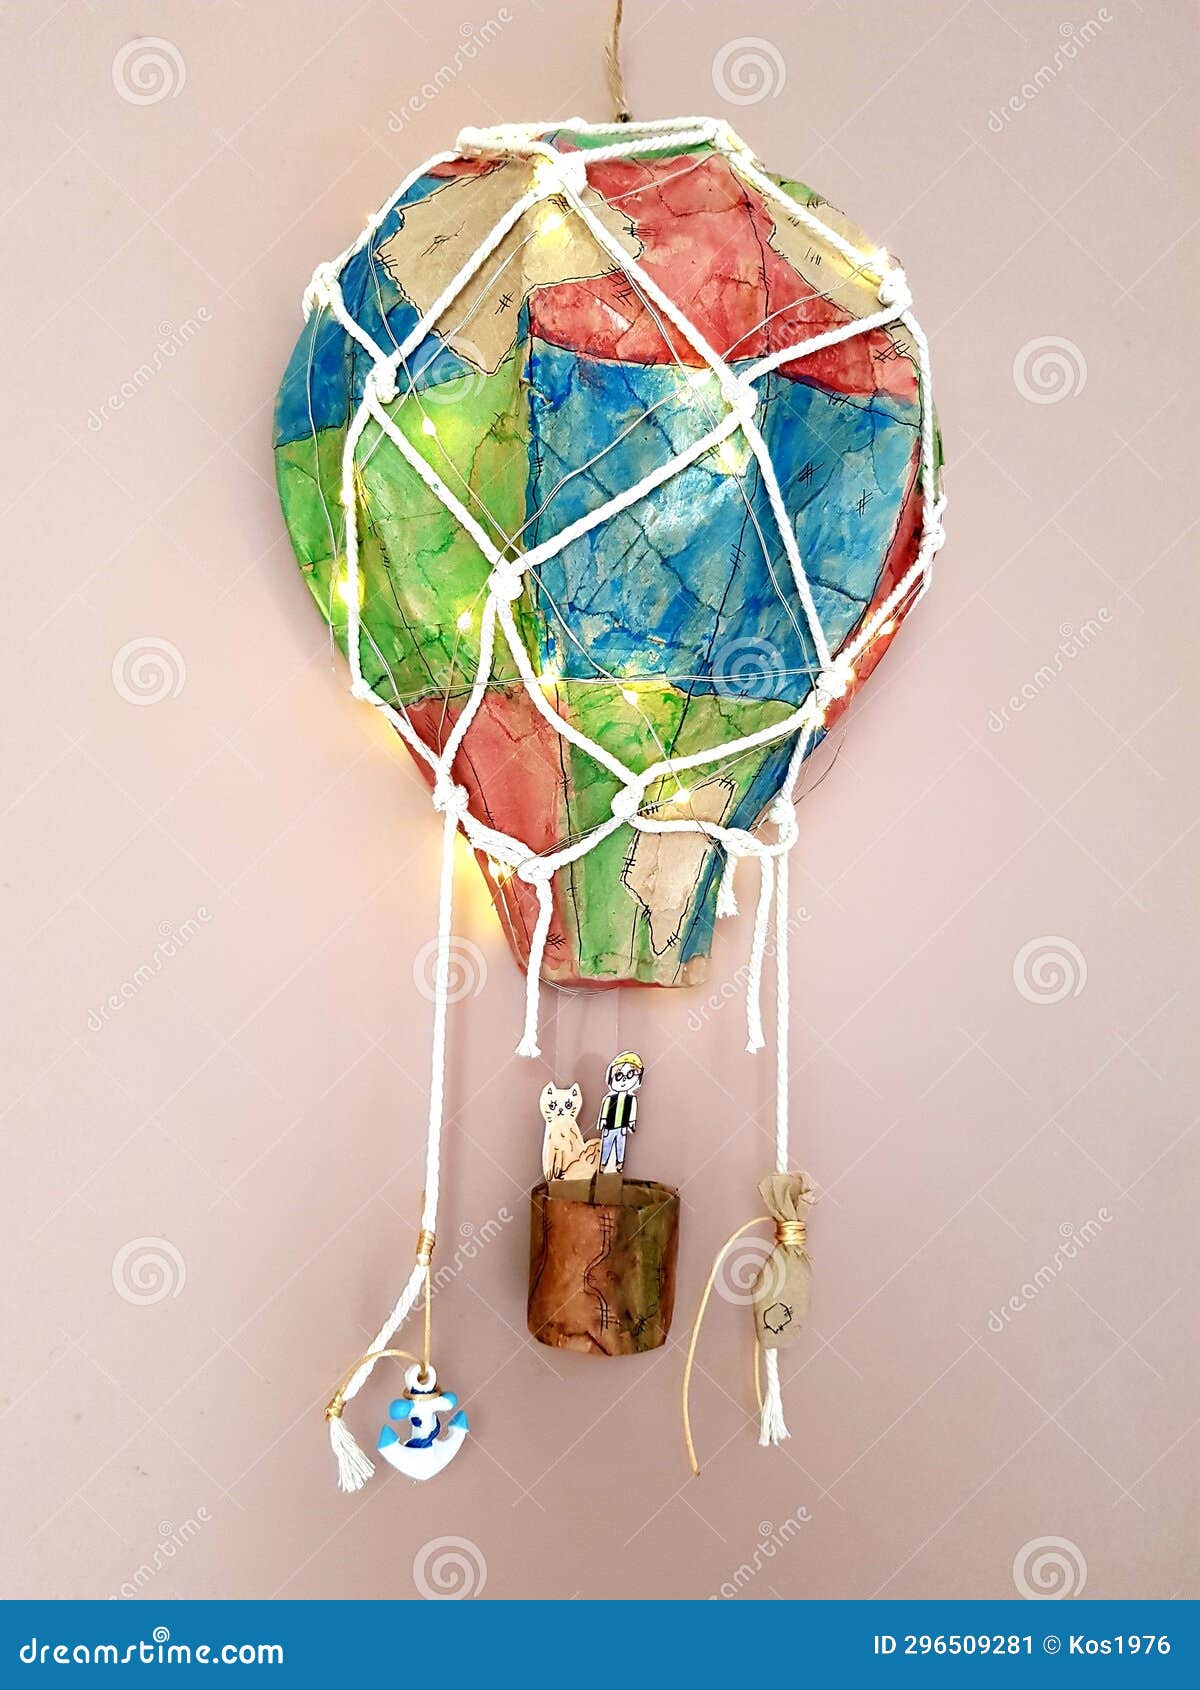 https://thumbs.dreamstime.com/z/colorful-dream-catcher-hanging-rope-colorful-handmade-colorful-balloon-hanging-string-colorful-handmade-296509281.jpg